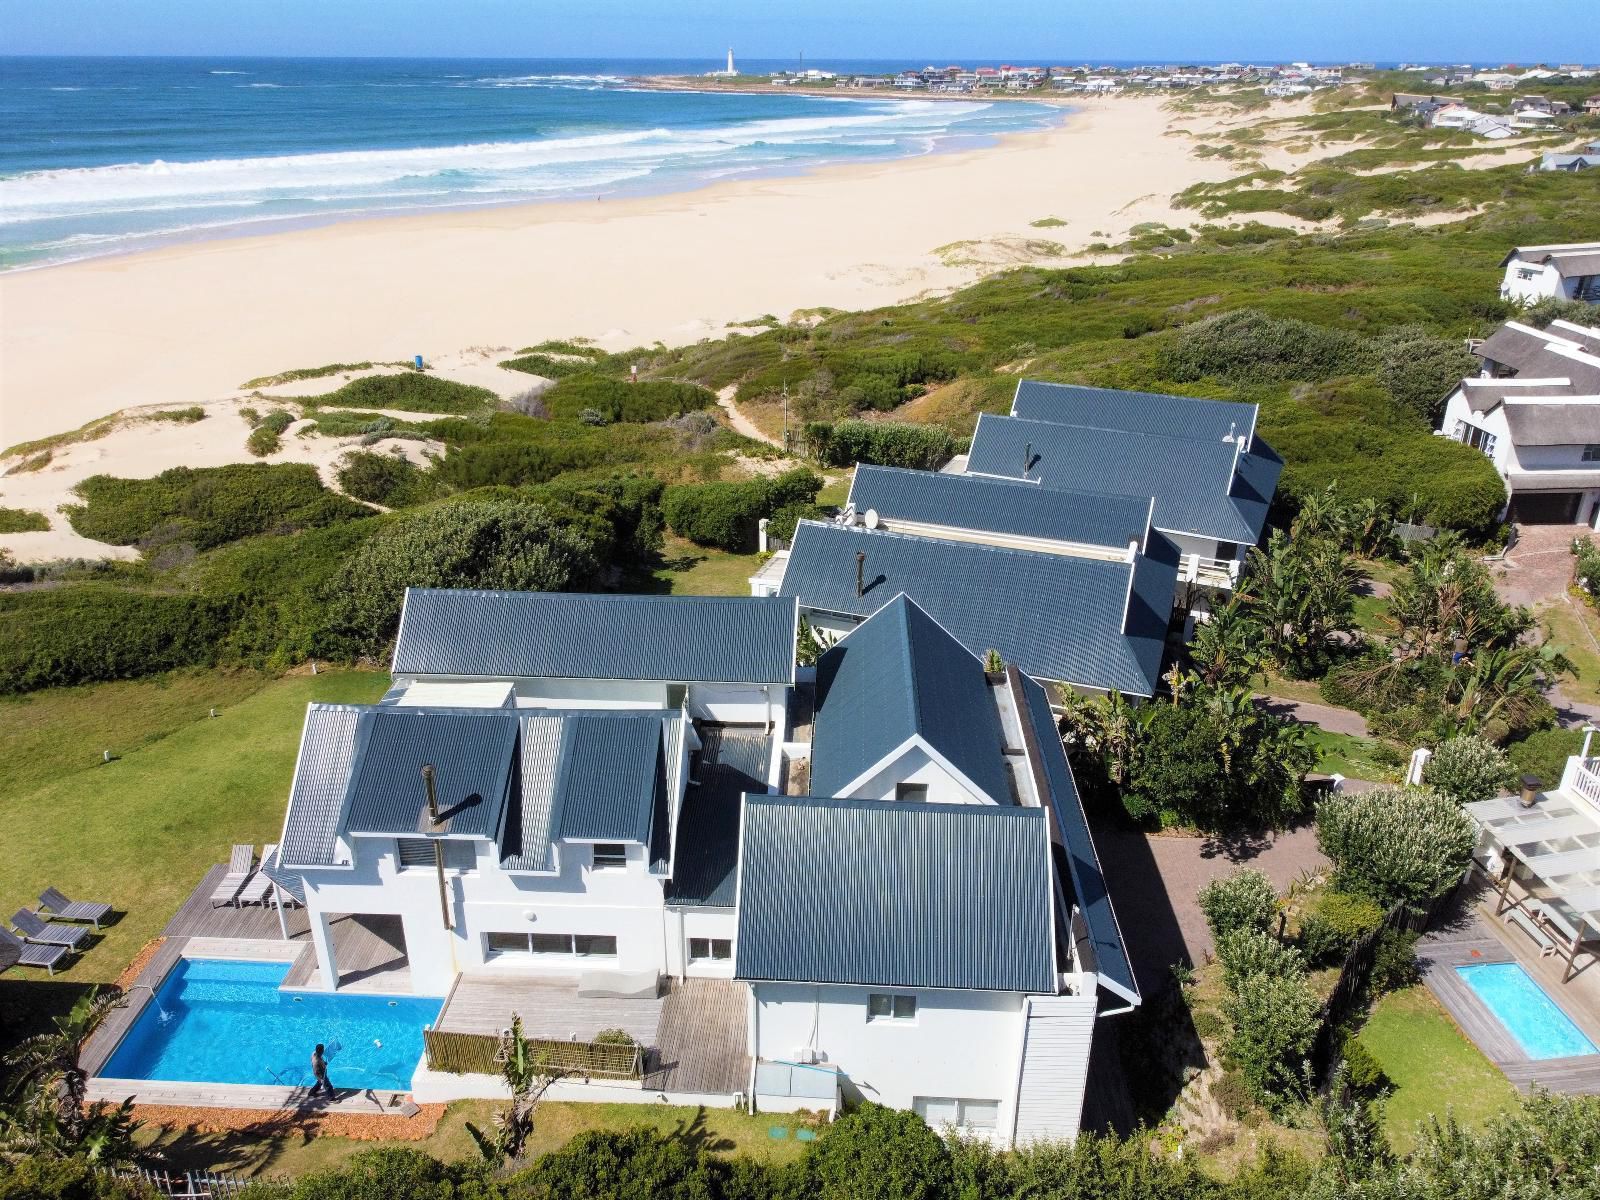 Beach Break Guest Houses And Villas Cape St Francis Eastern Cape South Africa Beach, Nature, Sand, Building, Architecture